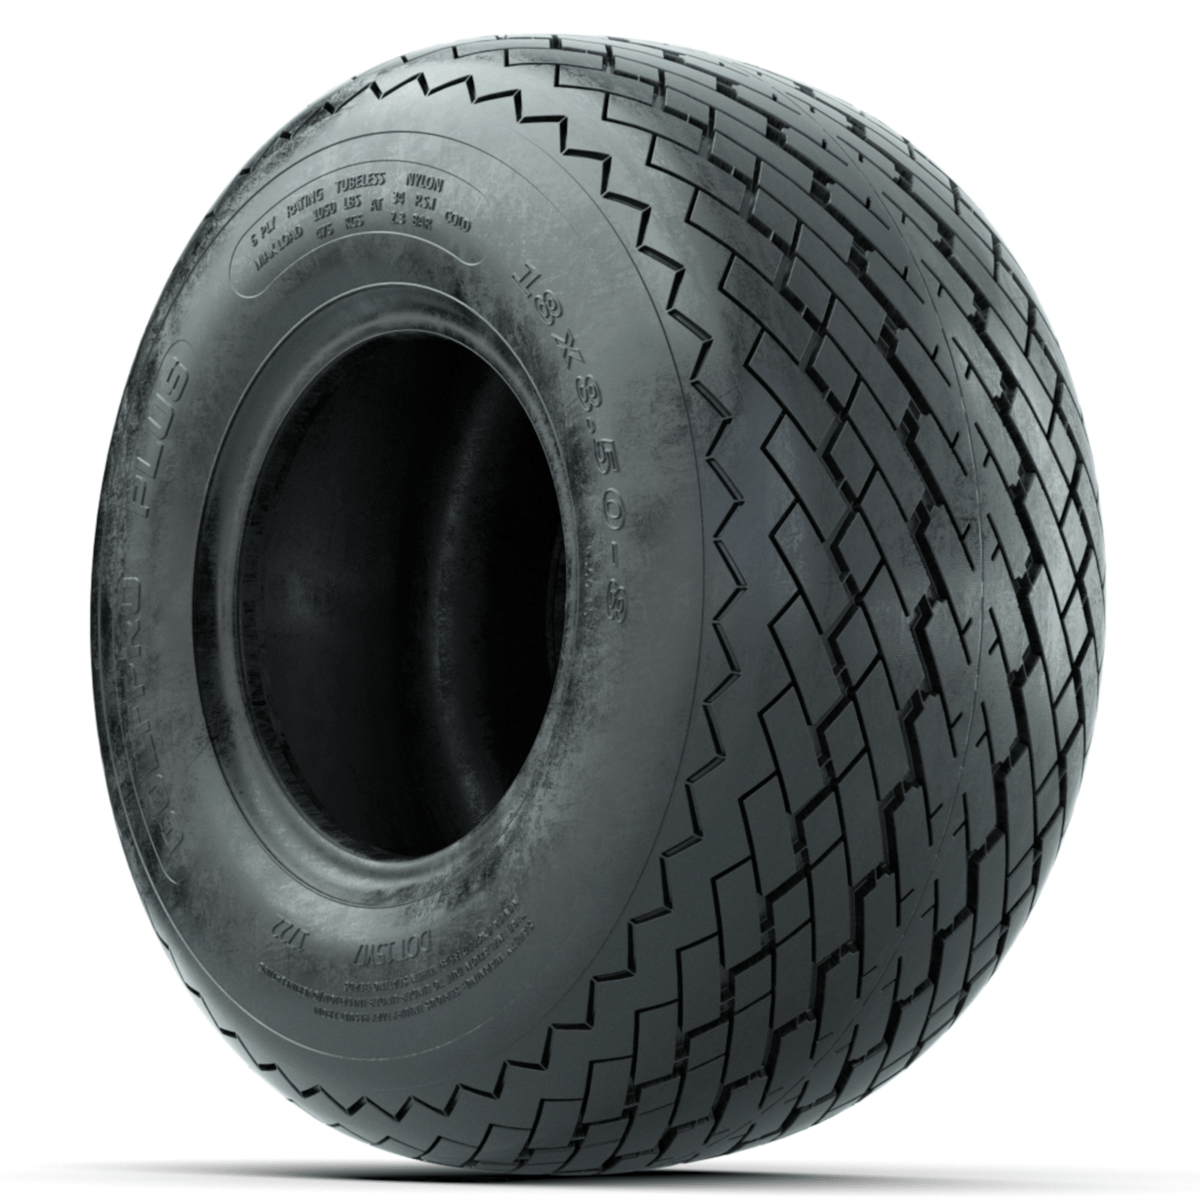 18x8.50-8 Golf Pro Plus Tire (No Lift Required)